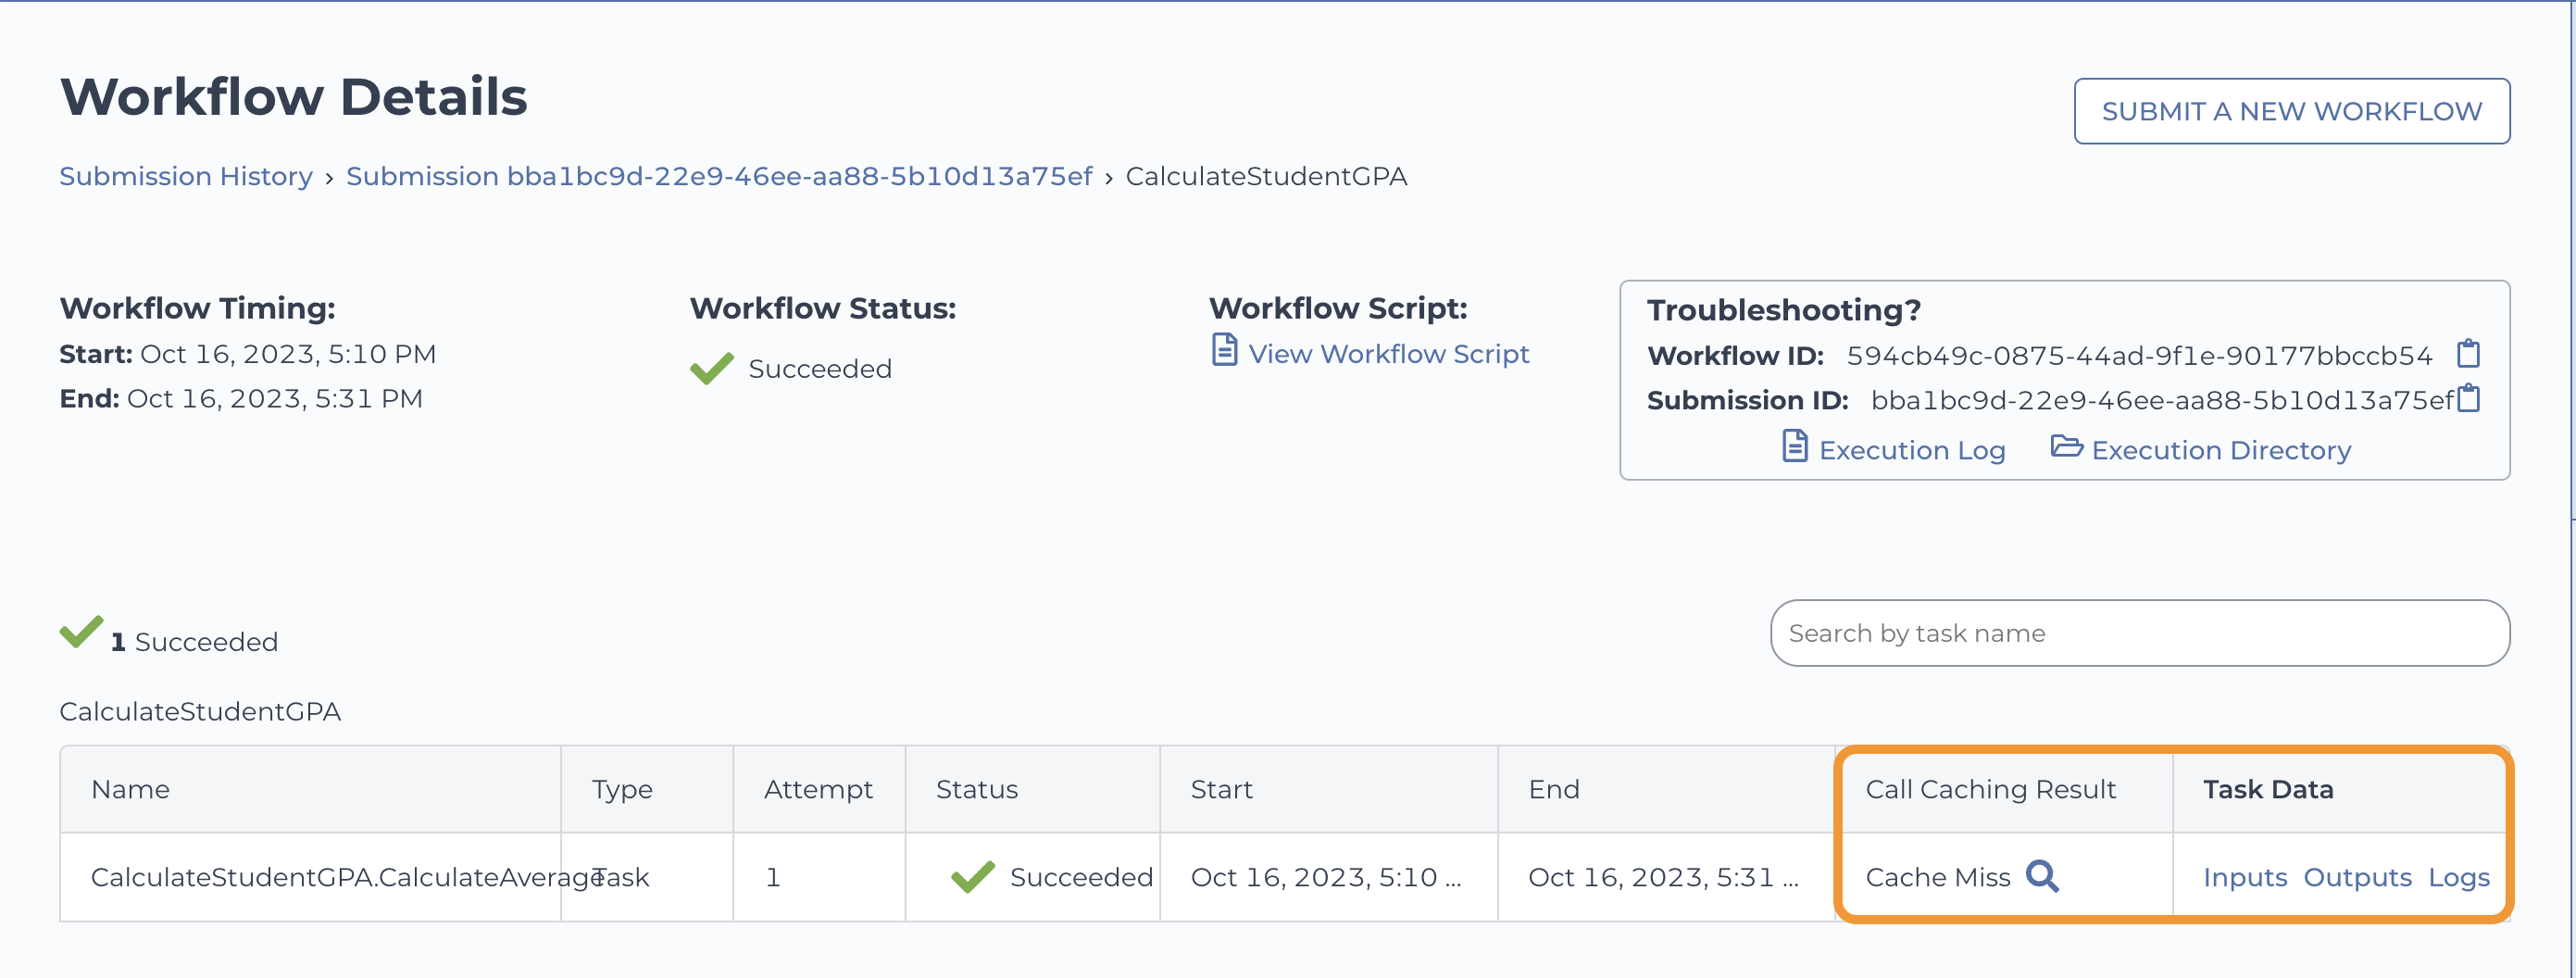 ToA-Call-caching_Call-caching-wizard-in-Workflows-Details_Screenshot.png